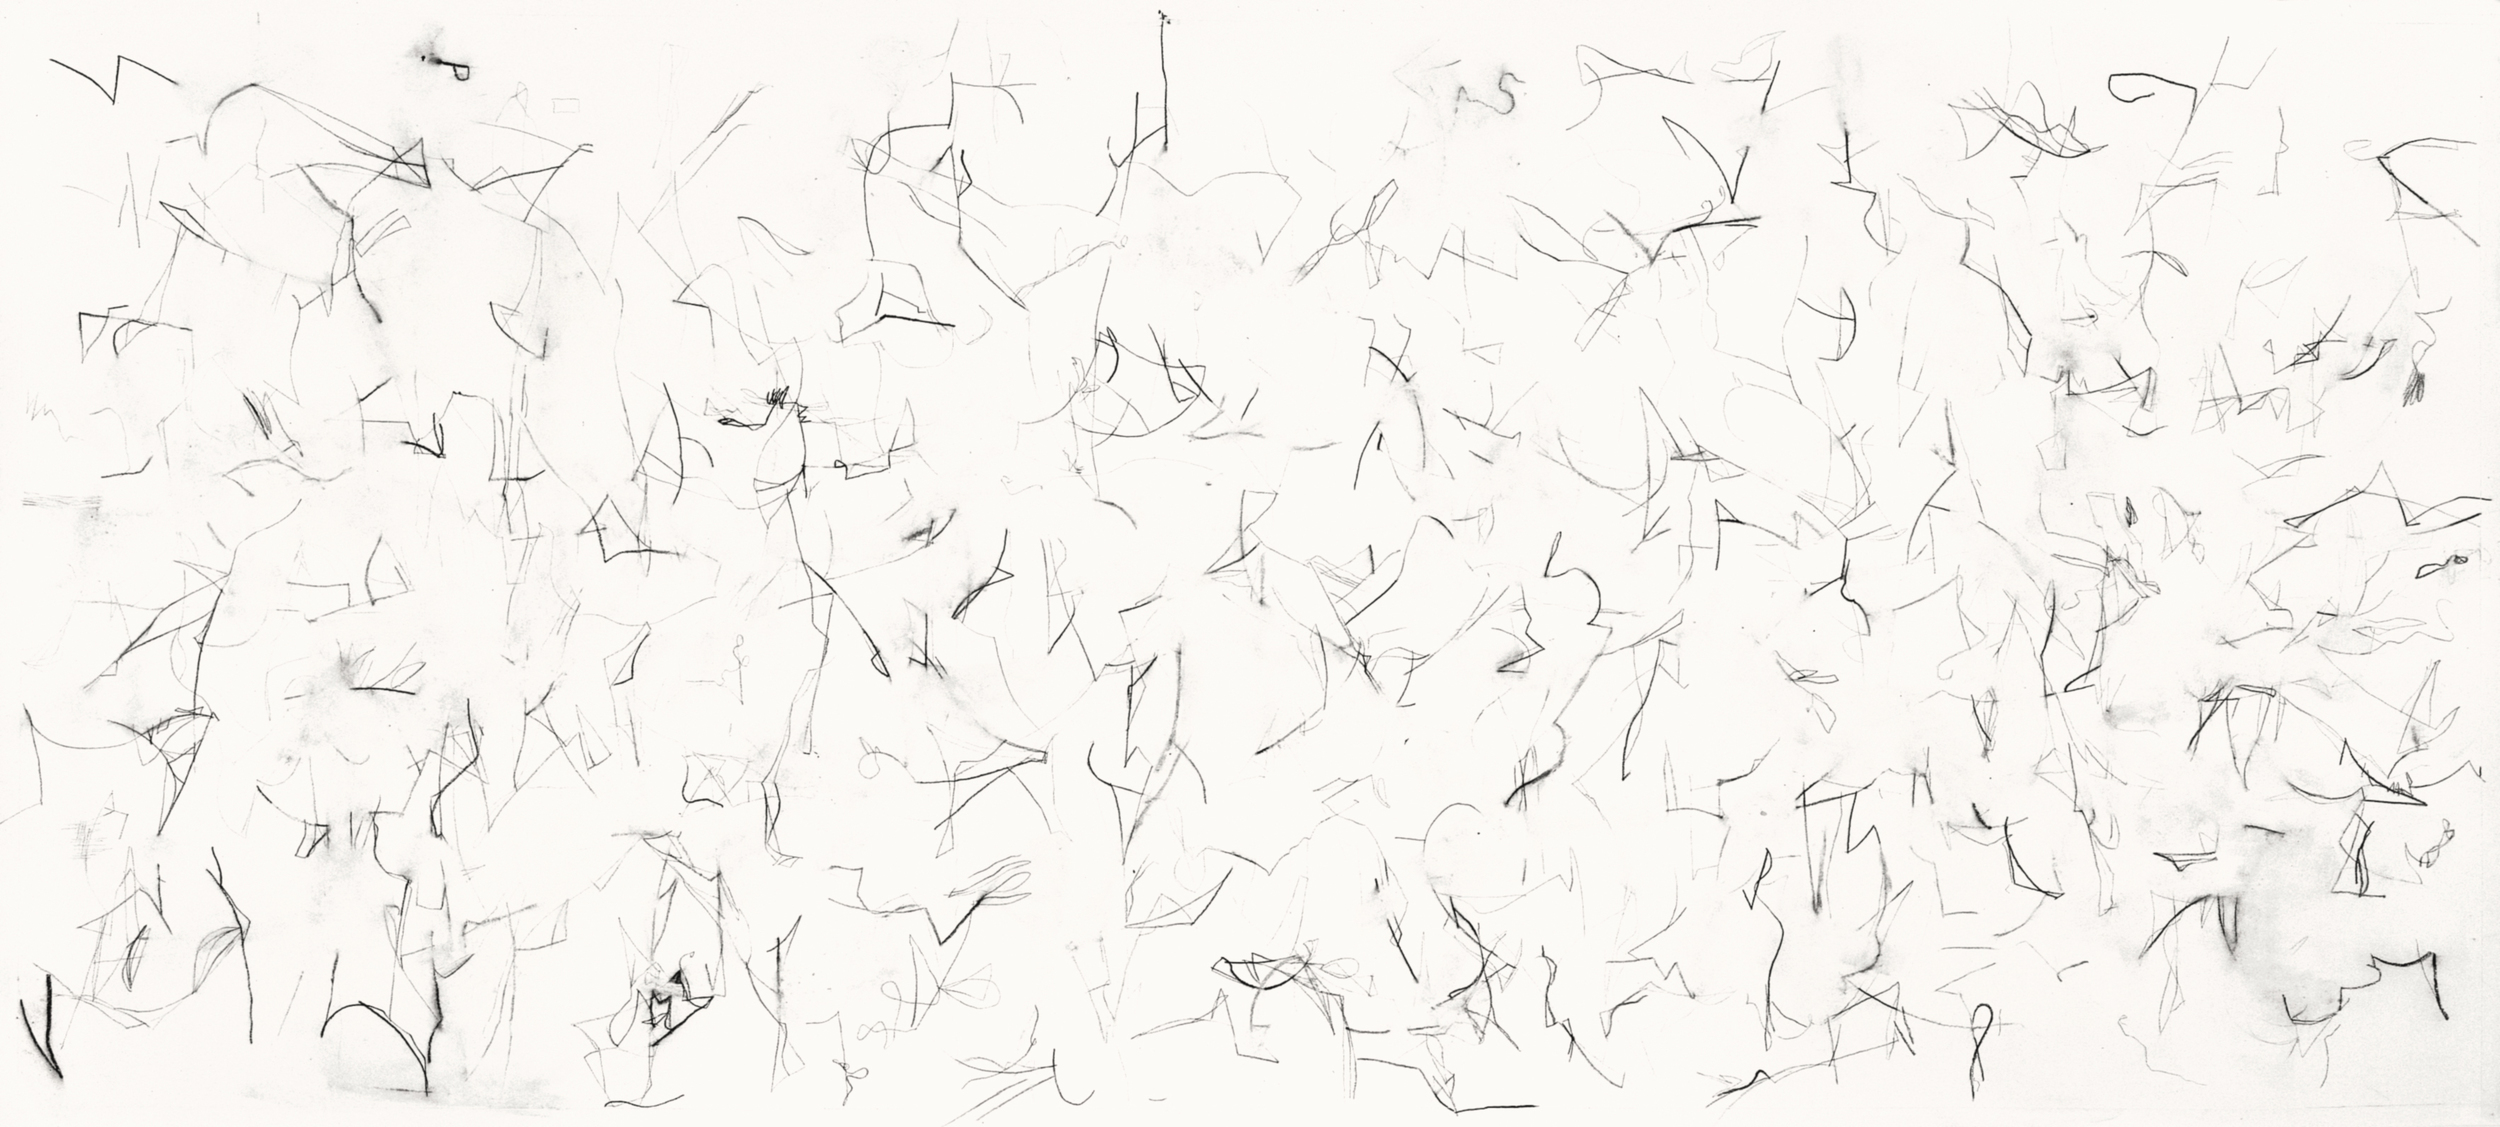   Untitled (L.99.1), 1999 charcoal, rabbit skin glue on paper ca. 48 x 107 inches Collection: Sarah-Ann and Werner H. Kramarsky   